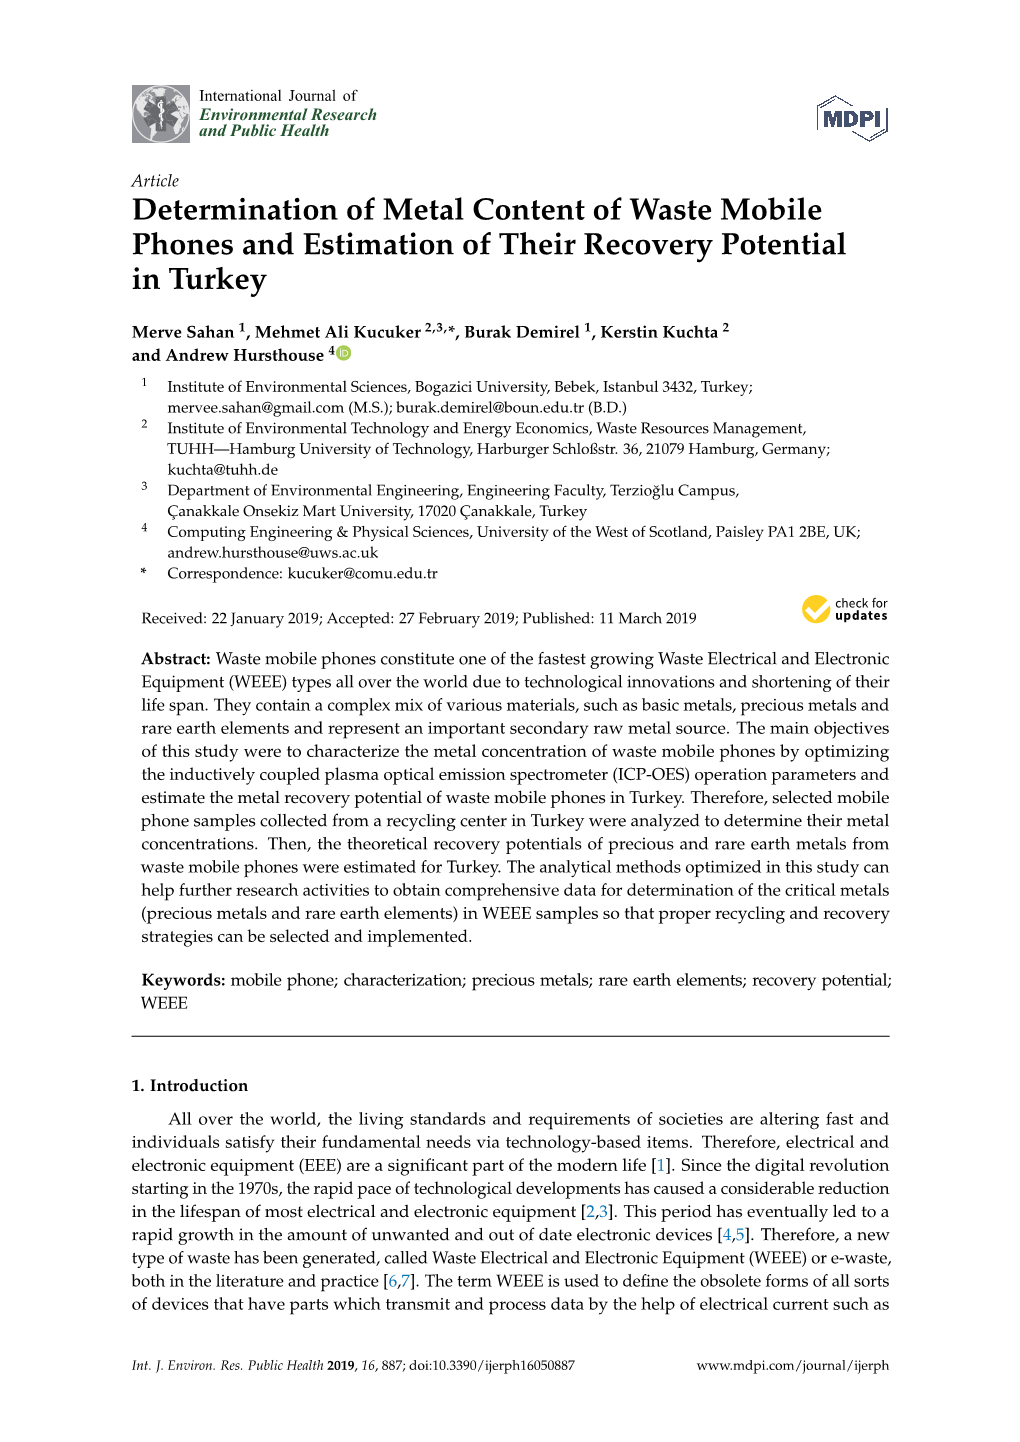 Determination of Metal Content of Waste Mobile Phones and Estimation of Their Recovery Potential in Turkey